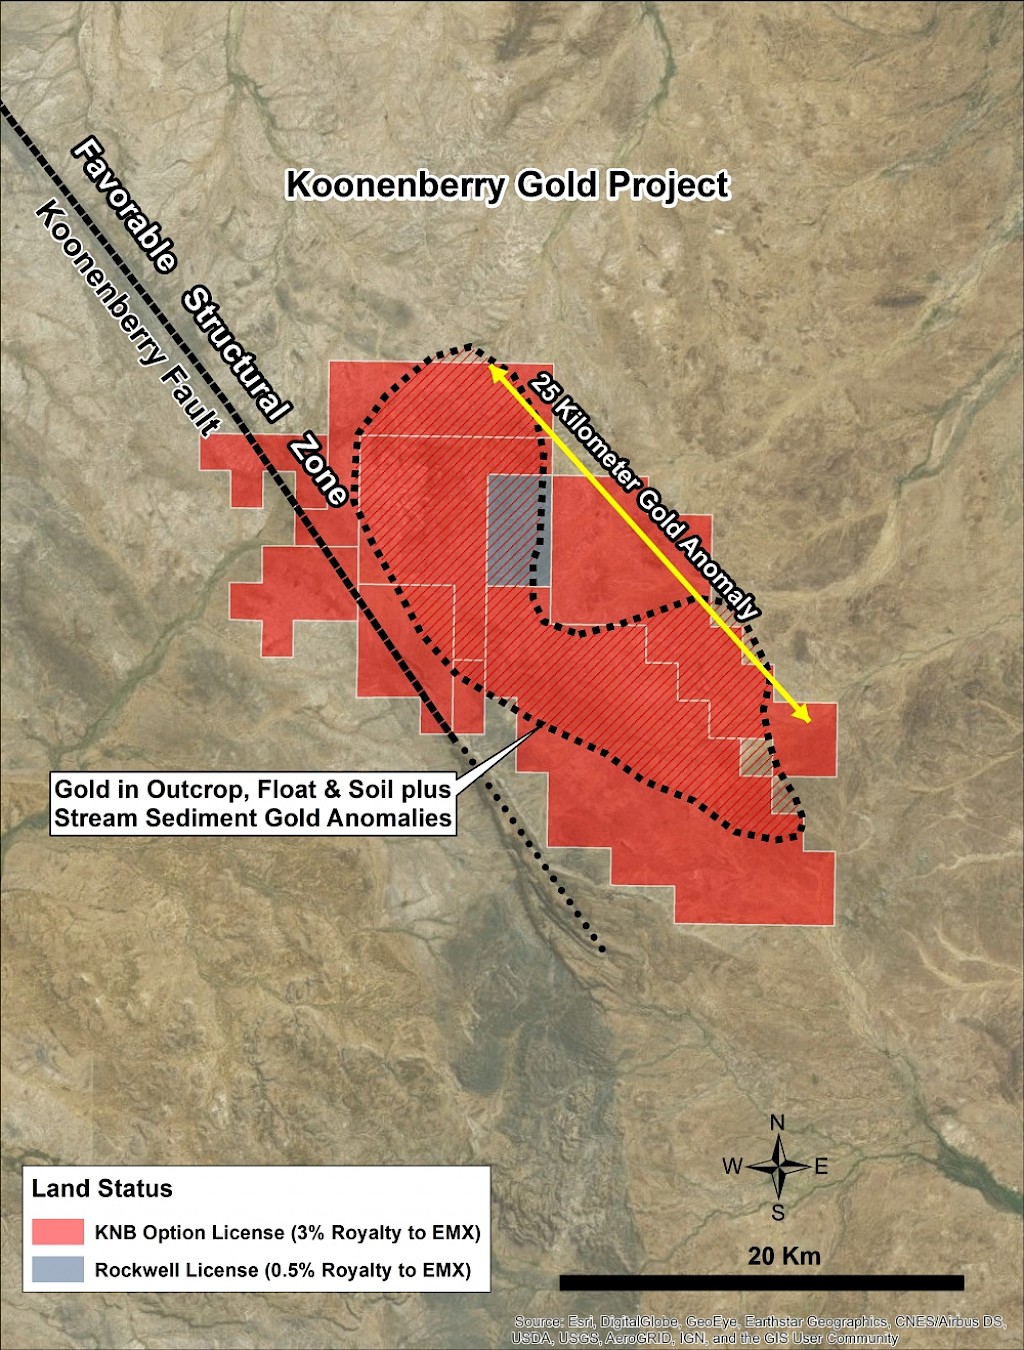 Land position of Koonenberry Gold Project.